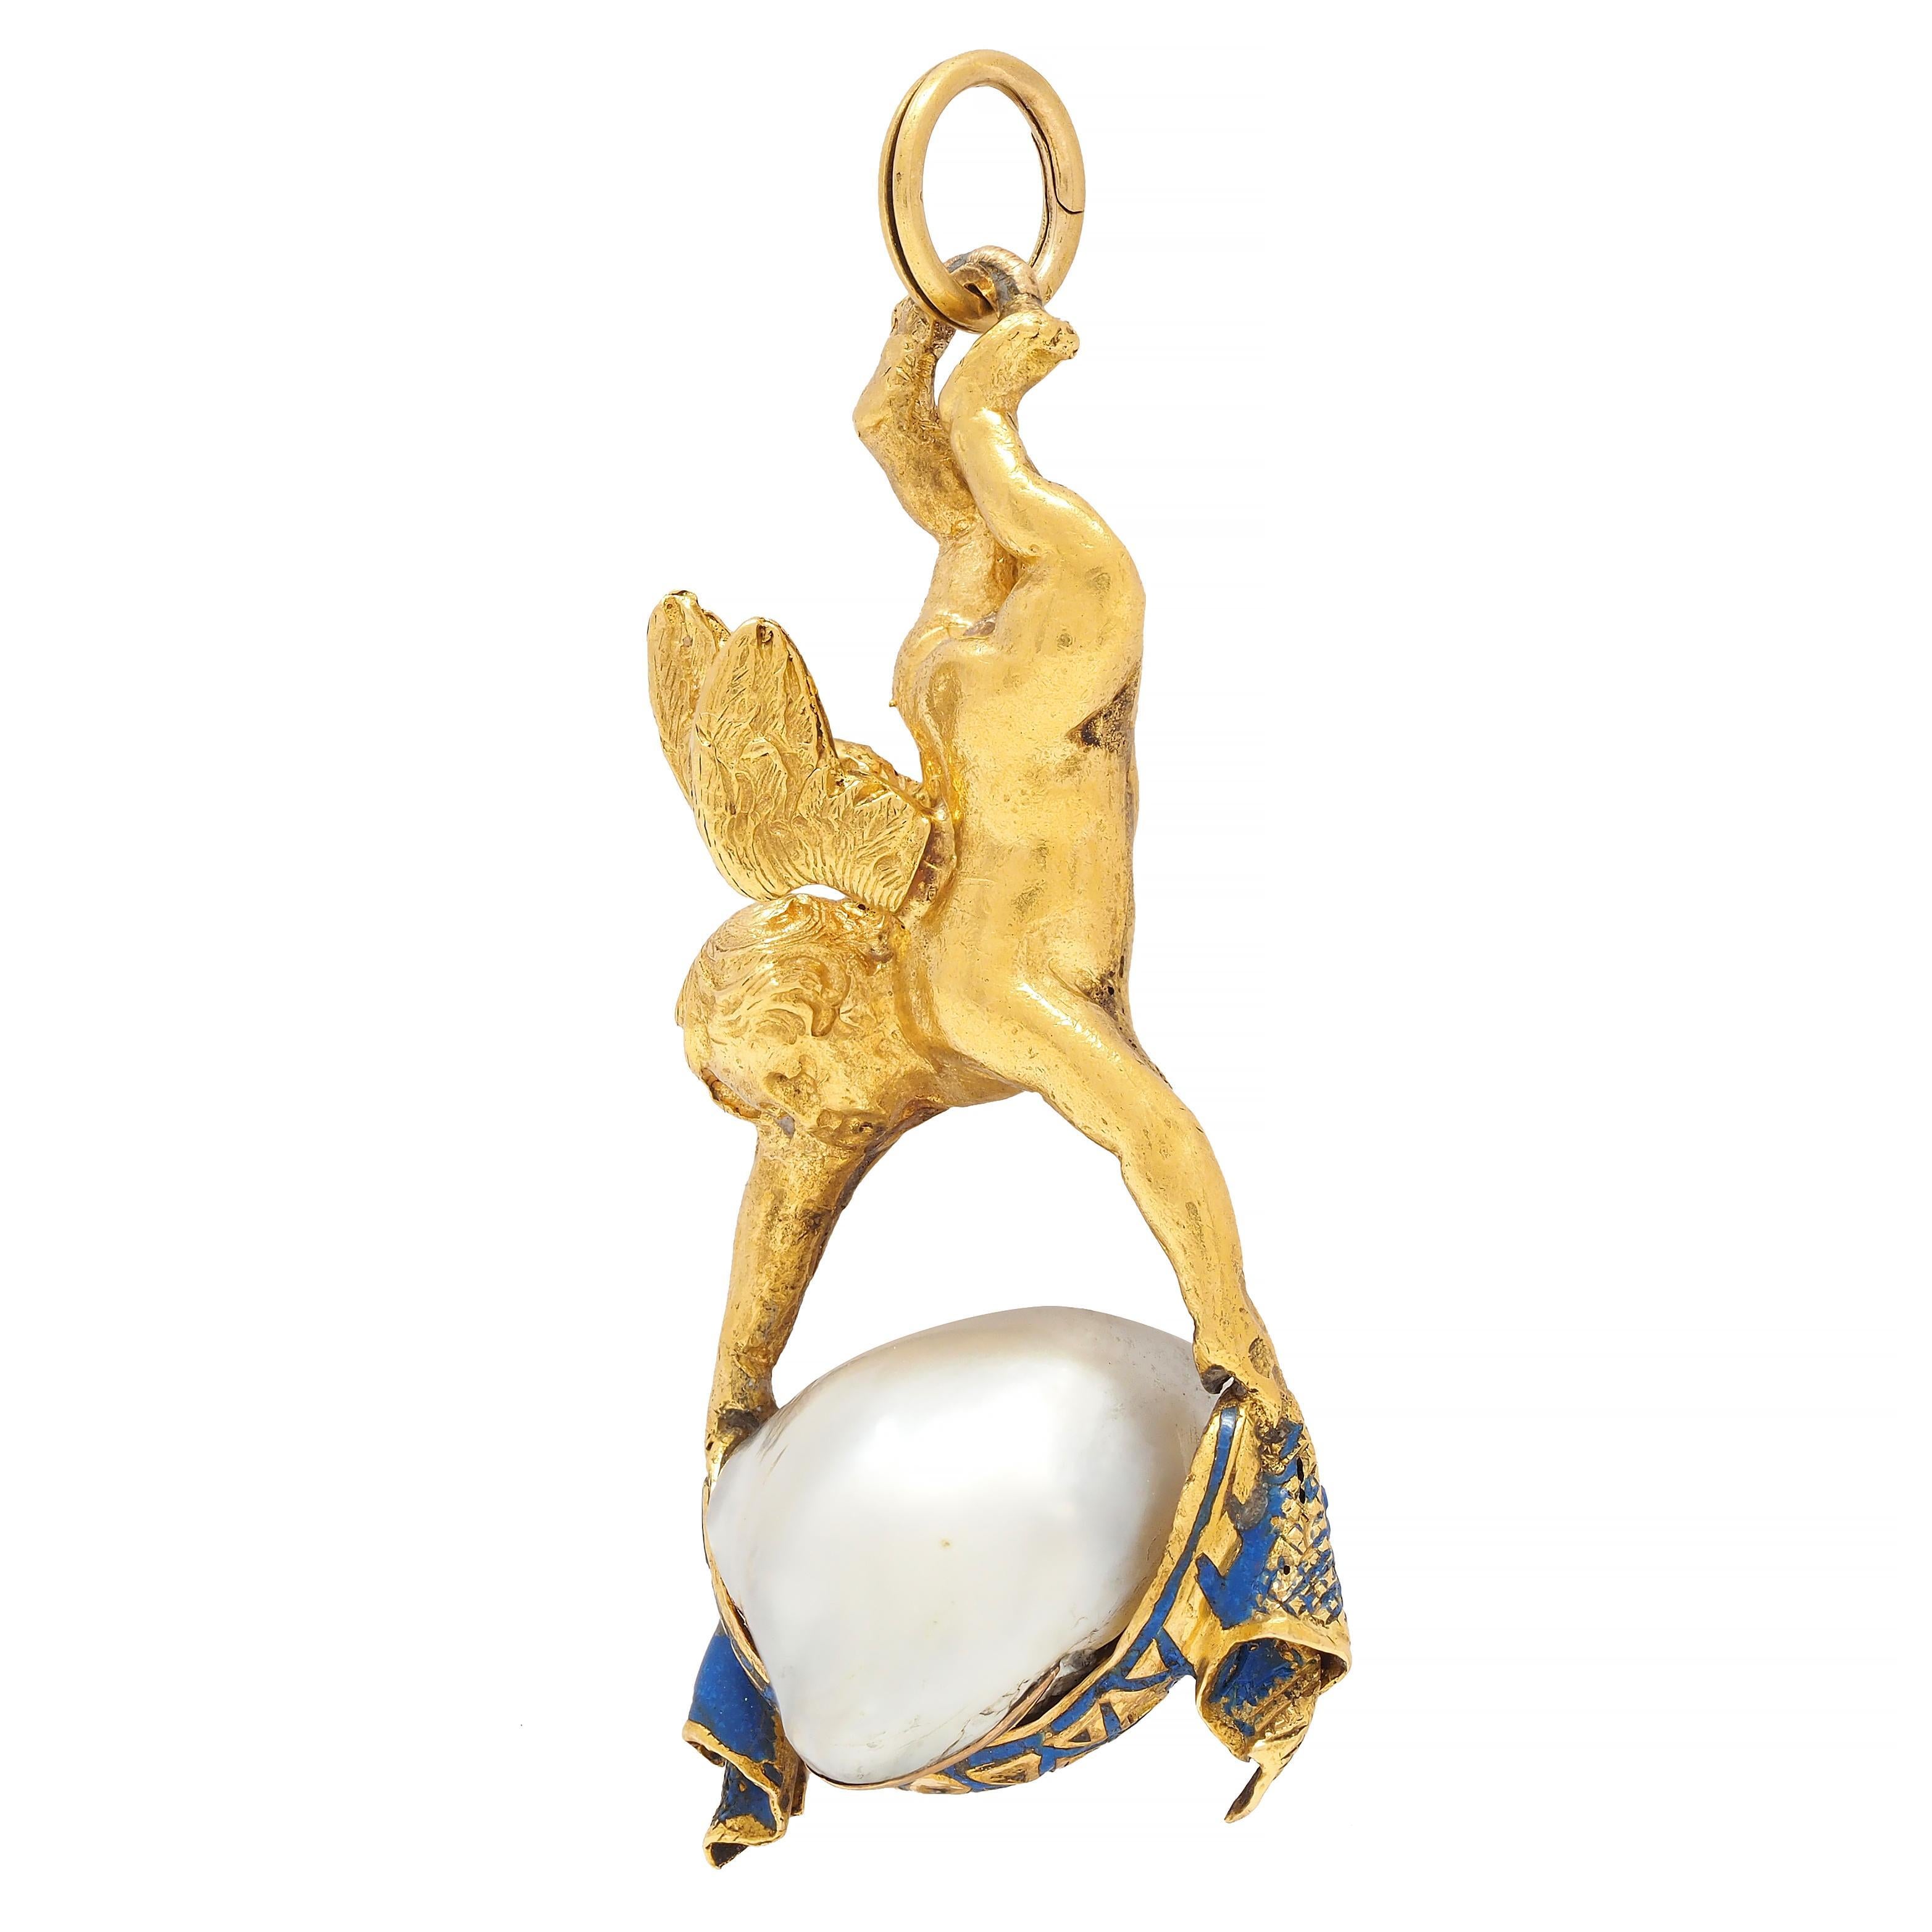 Designed as a dimensional winged cherub holding a draped garland 
Featuring an enamel pattern - opaque blue with loss consistent with age
Cradling a baroque pearl measuring 10.5 x 13.0 mm 
Silver in body color with strong iridescence 
Complete by